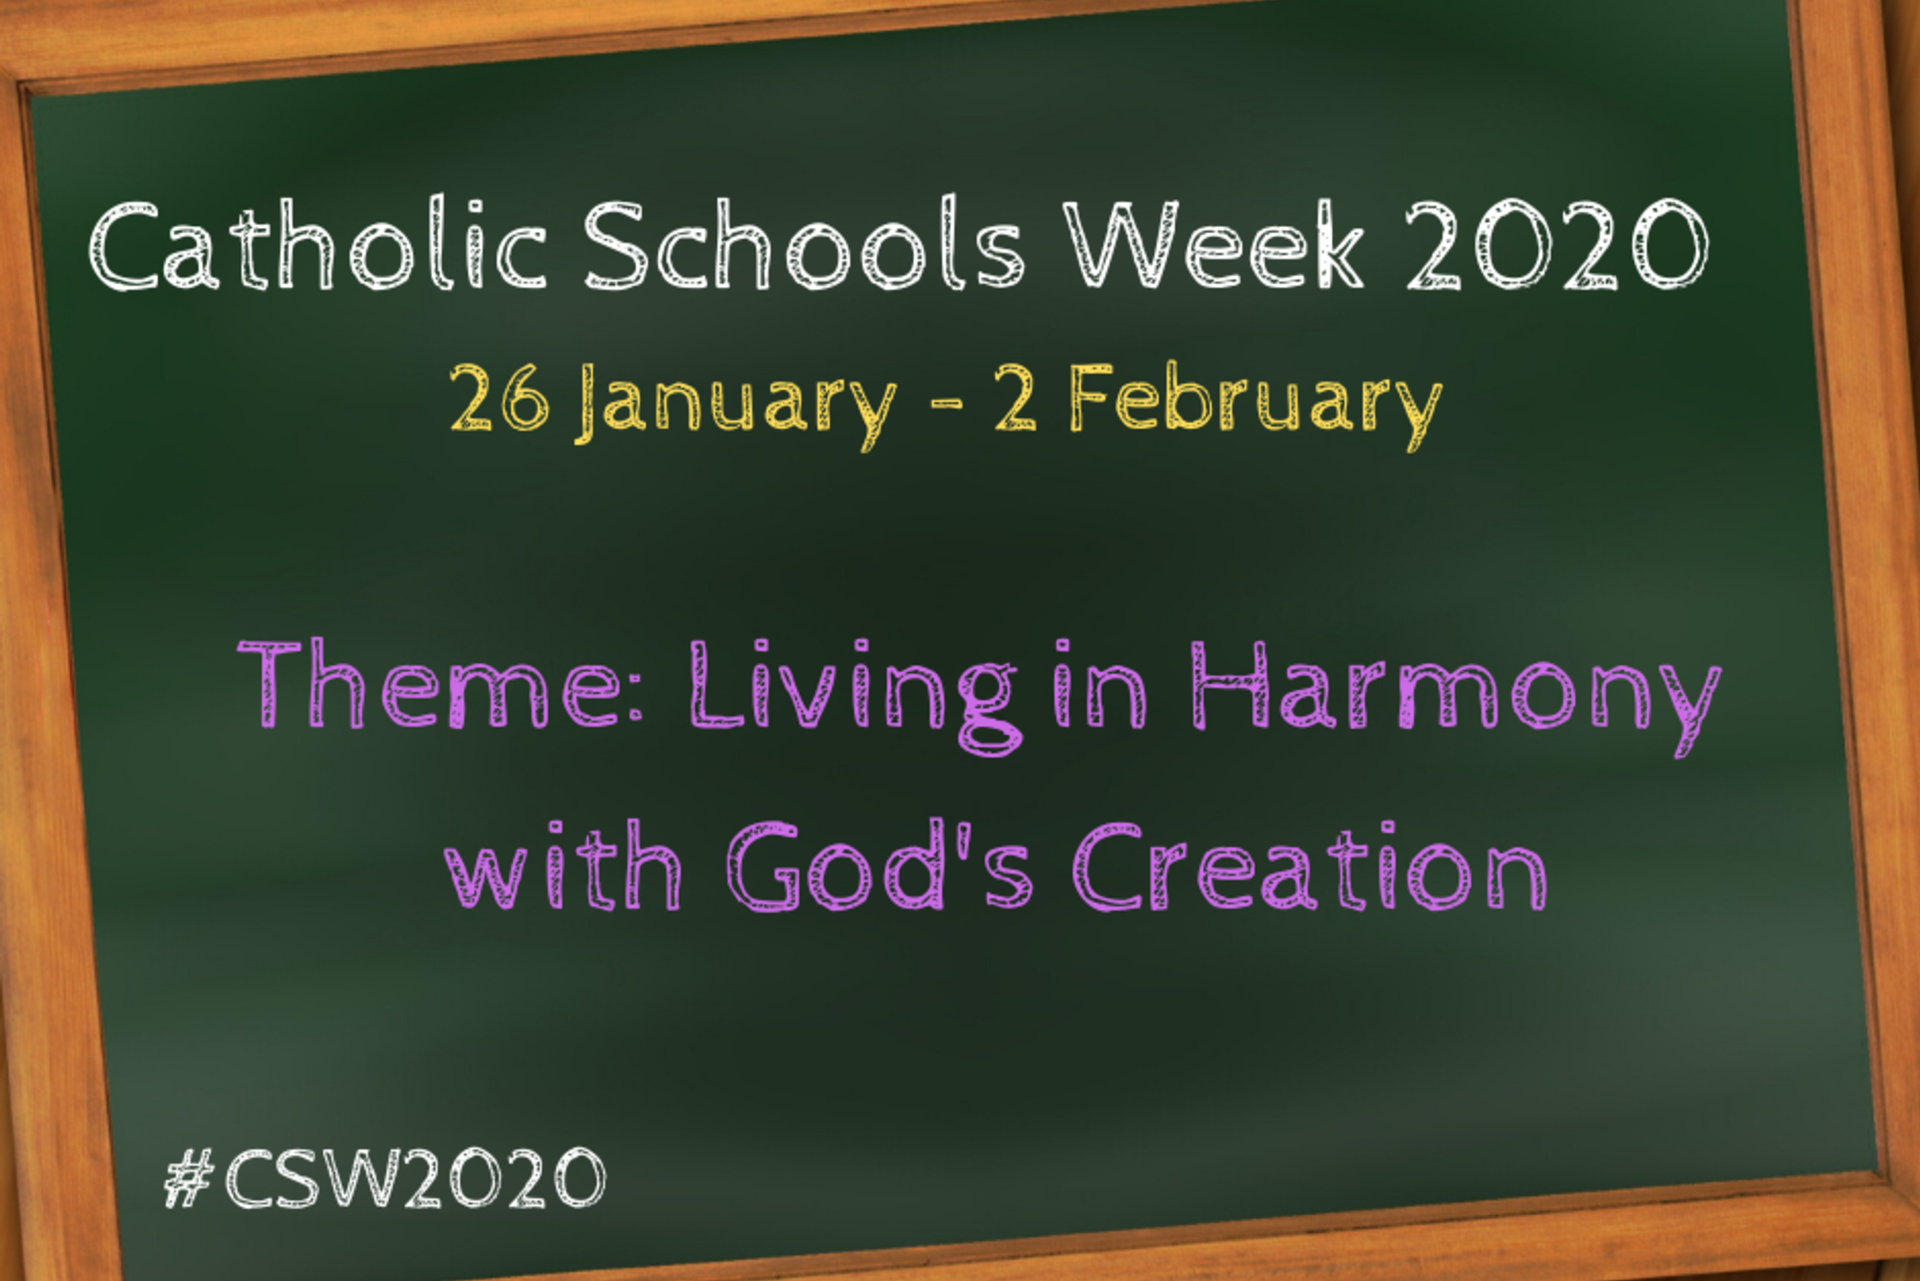 New audio and Resources for Friday of Catholic Schools Week 2020